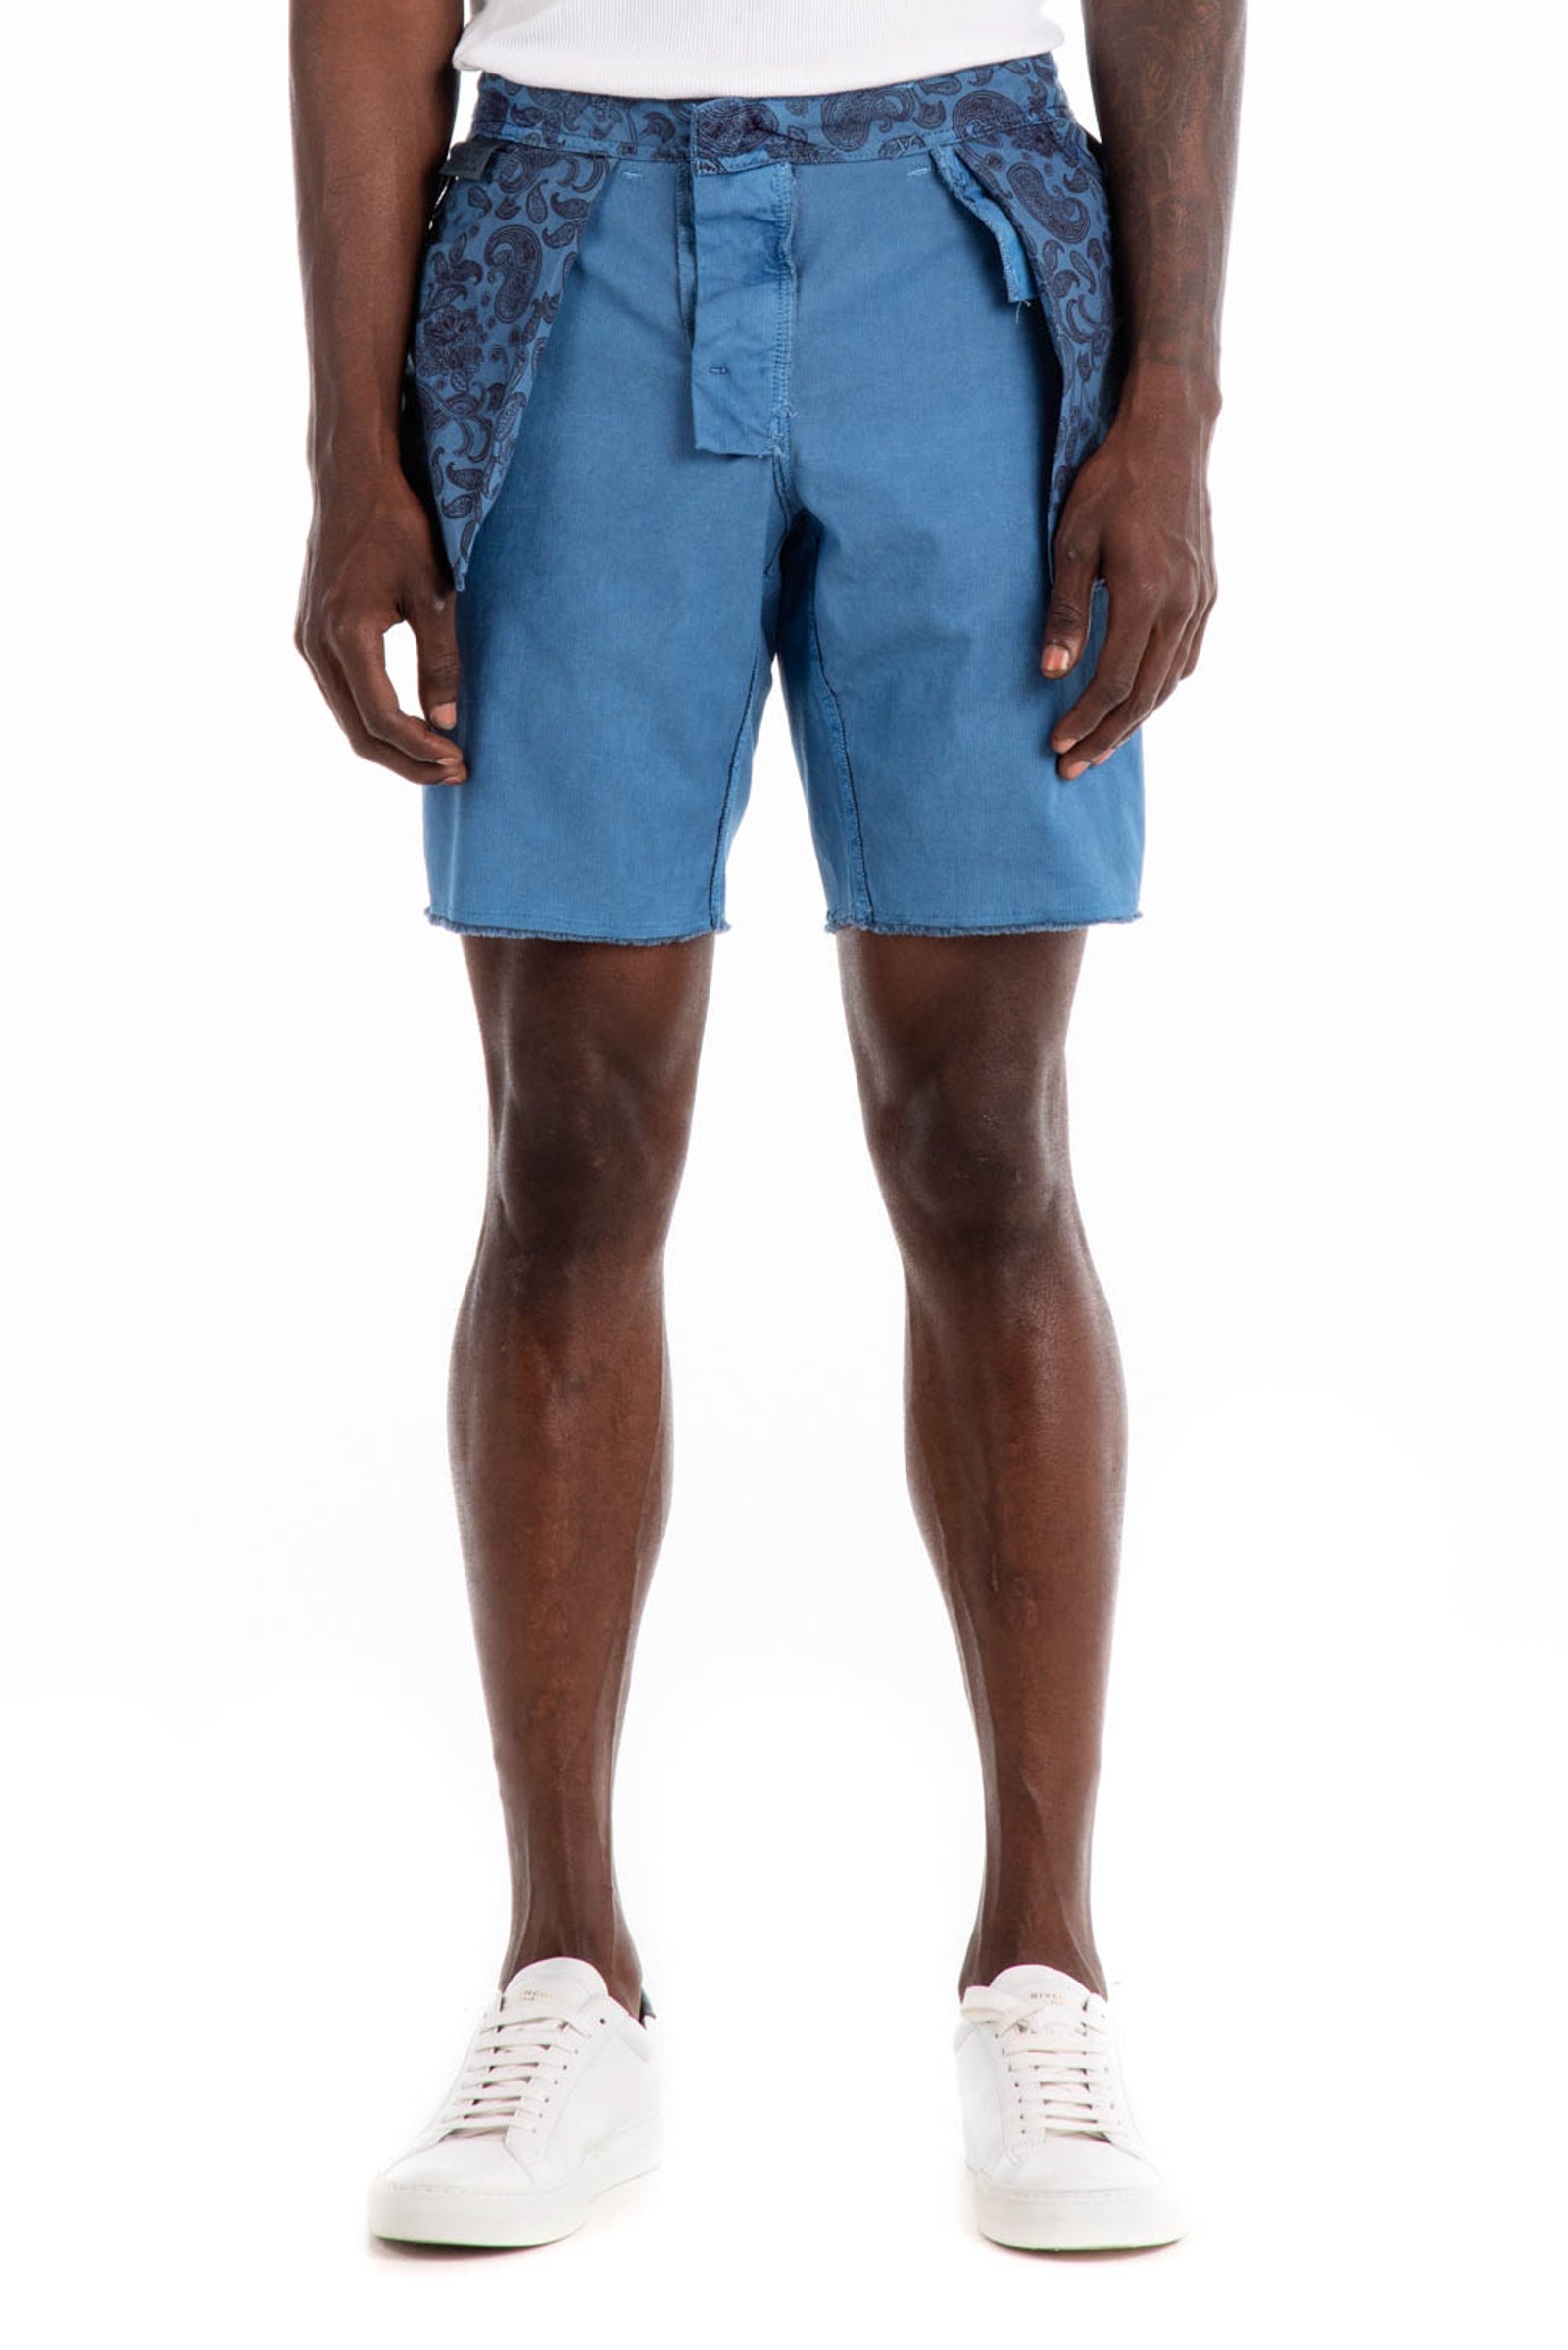 Original Paperbacks Brentwood Chino Short in Marina on Model Cropped Inside Out Pocket Front View